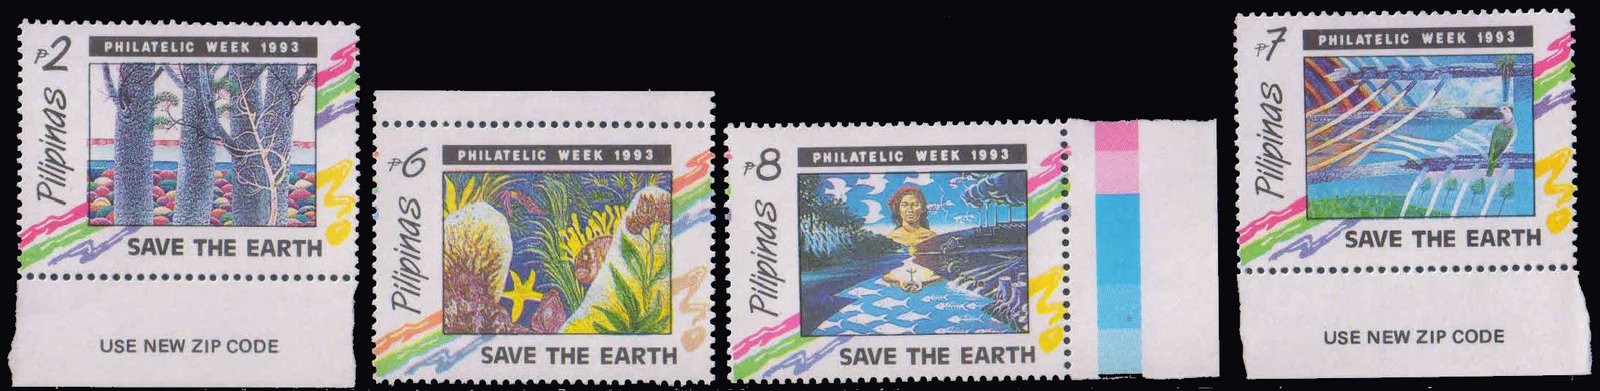 PHILIPPINES 1983-Save the Earth, Philatelic Week, Trees, Marine Flora & Fauna, Dove & Irrigation System, Pollution, Set of 4, MNH, S.G. 2583-86-Cat � 8-